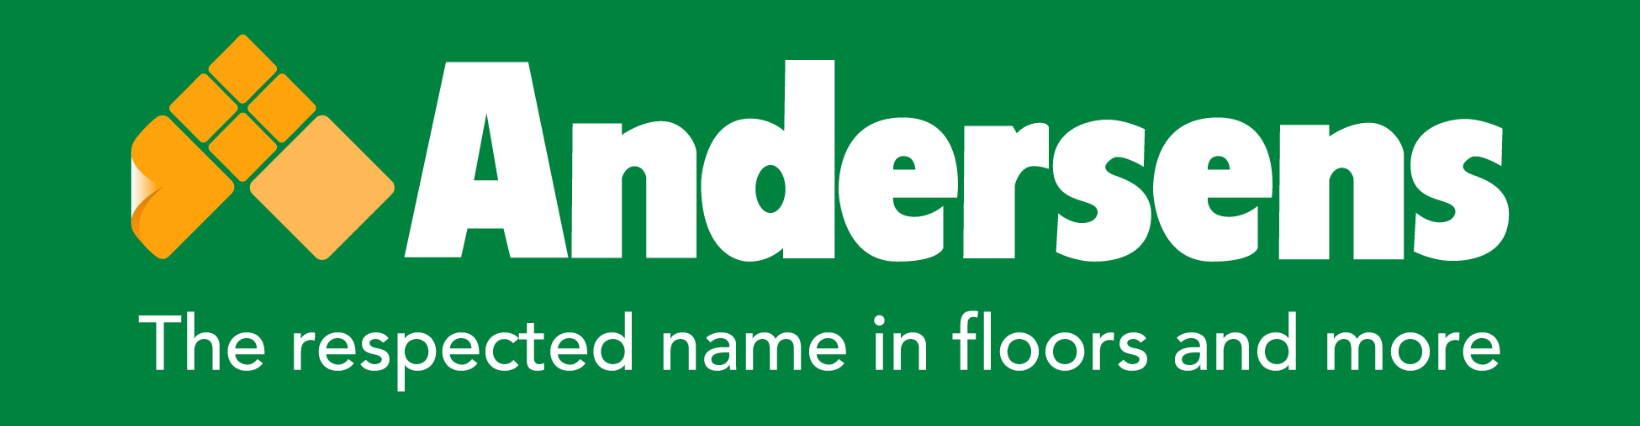 Andersens logo with tag.png